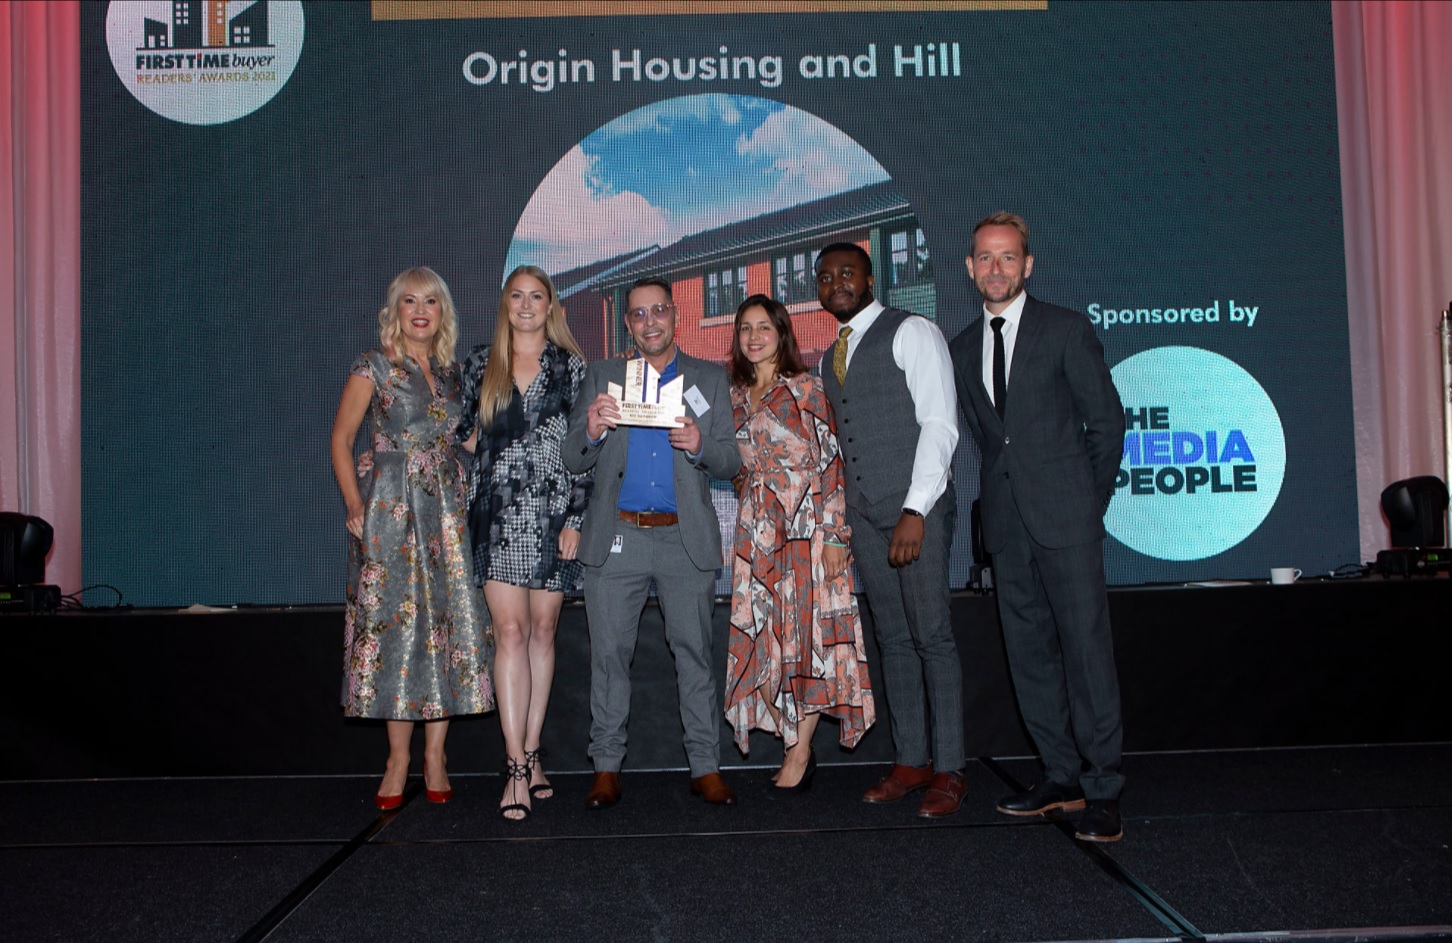 Origin Housing shortlisted for two First Time Buyer Readers’ Awards 2022